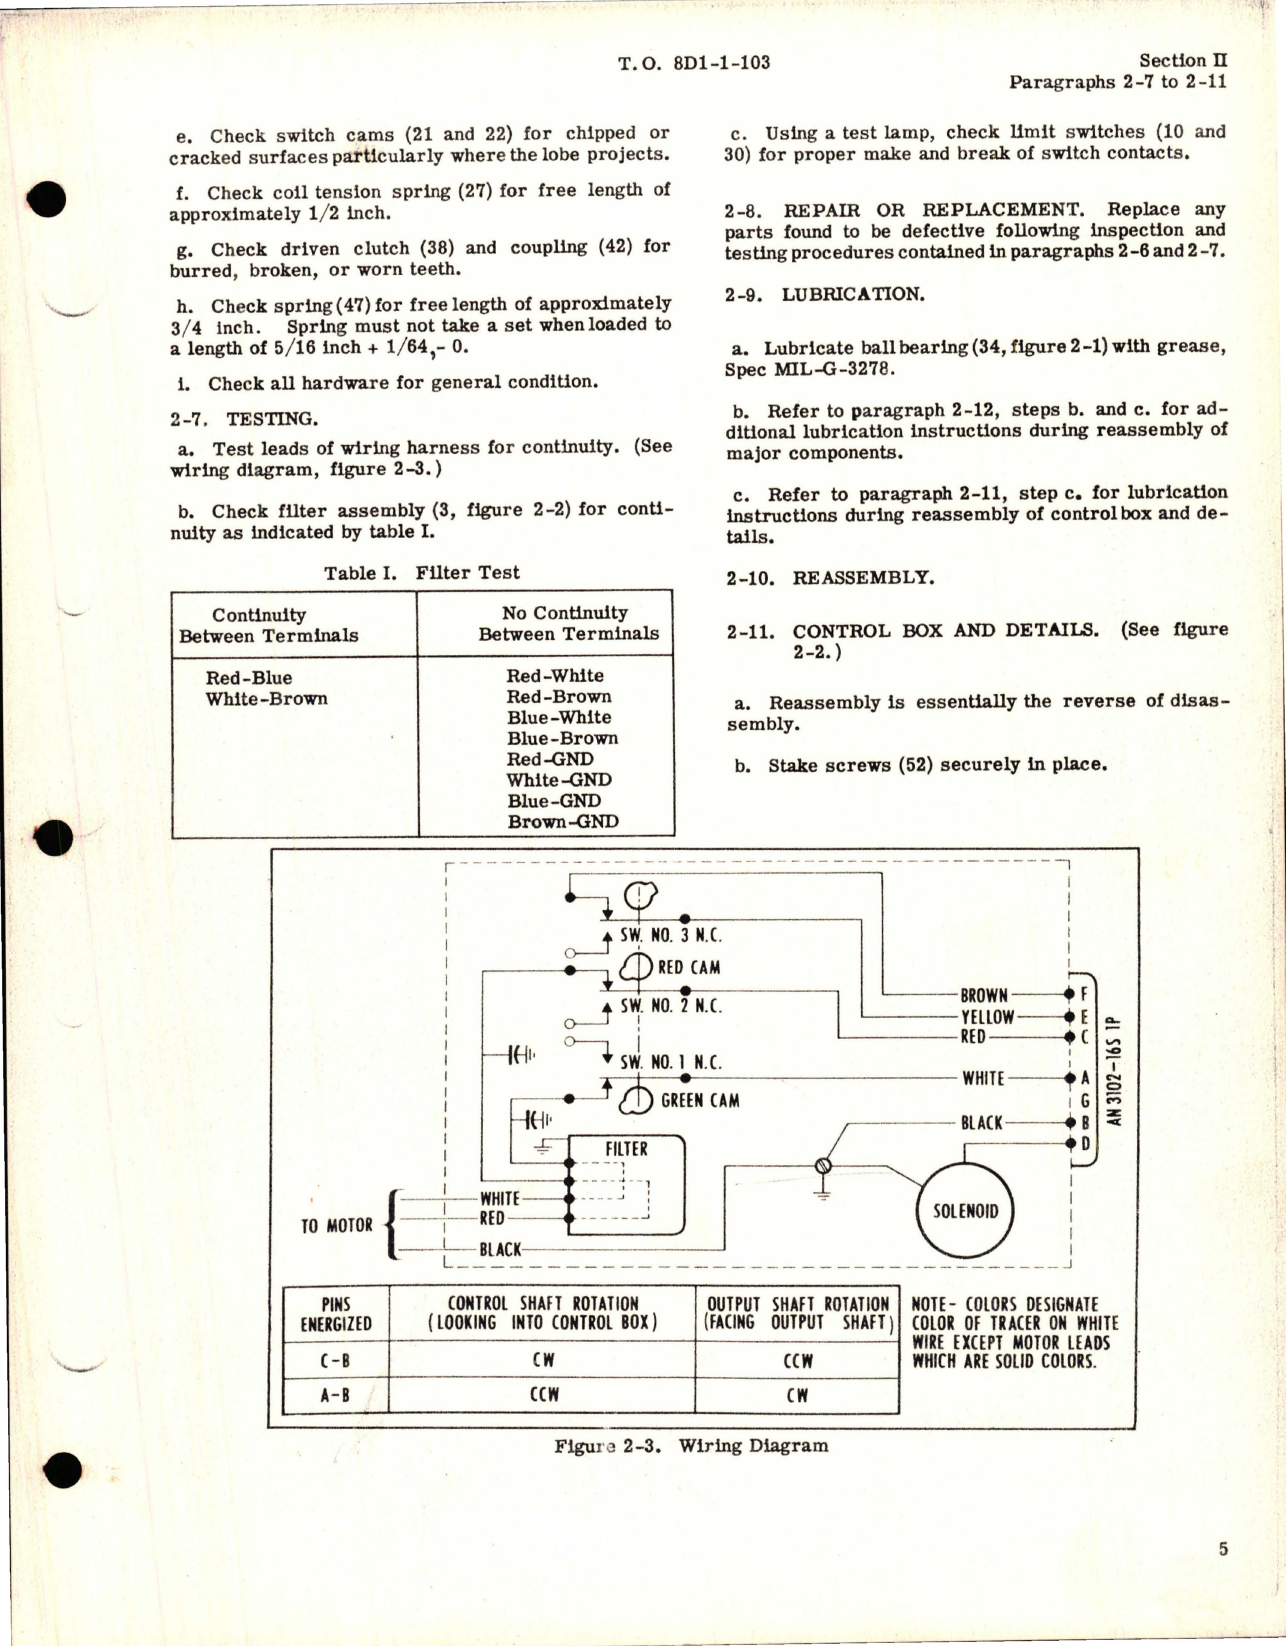 Sample page 7 from AirCorps Library document: Overhaul Instructions for Rotary Actuator 